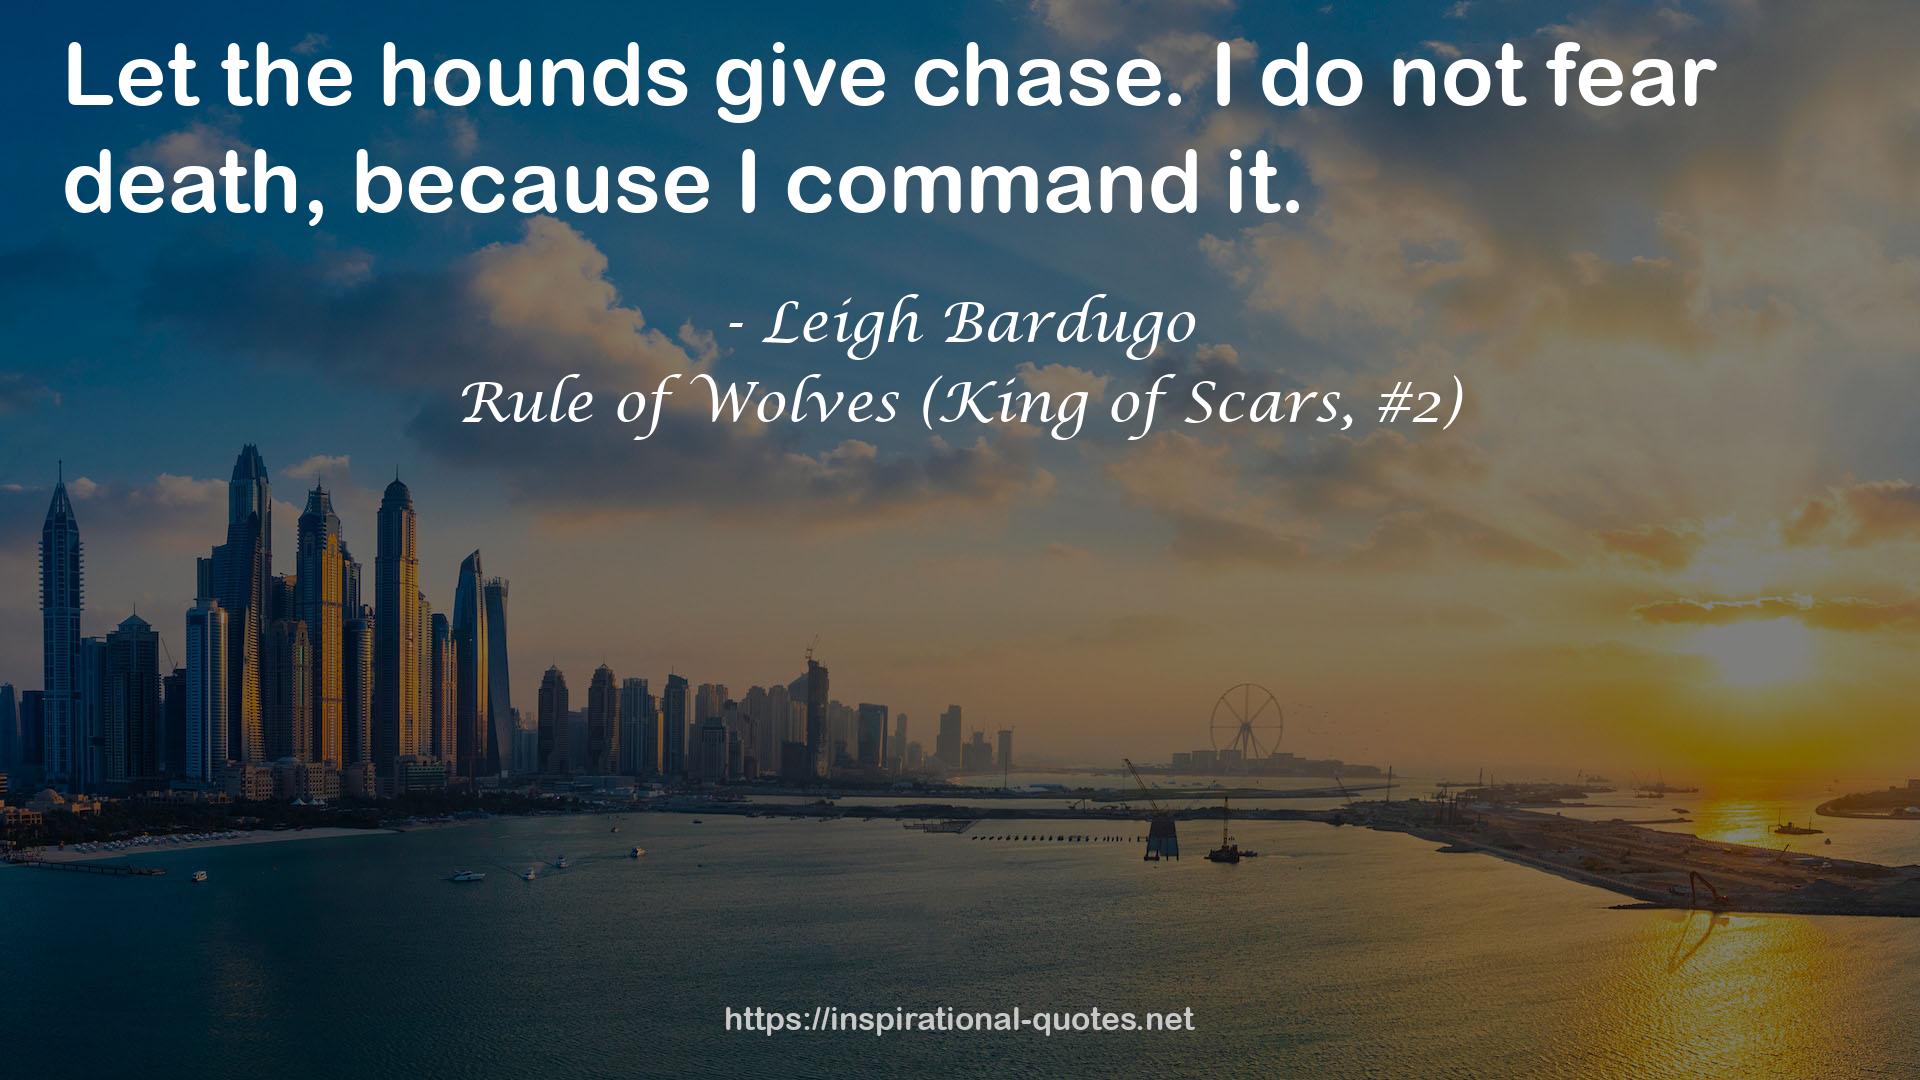 Rule of Wolves (King of Scars, #2) QUOTES